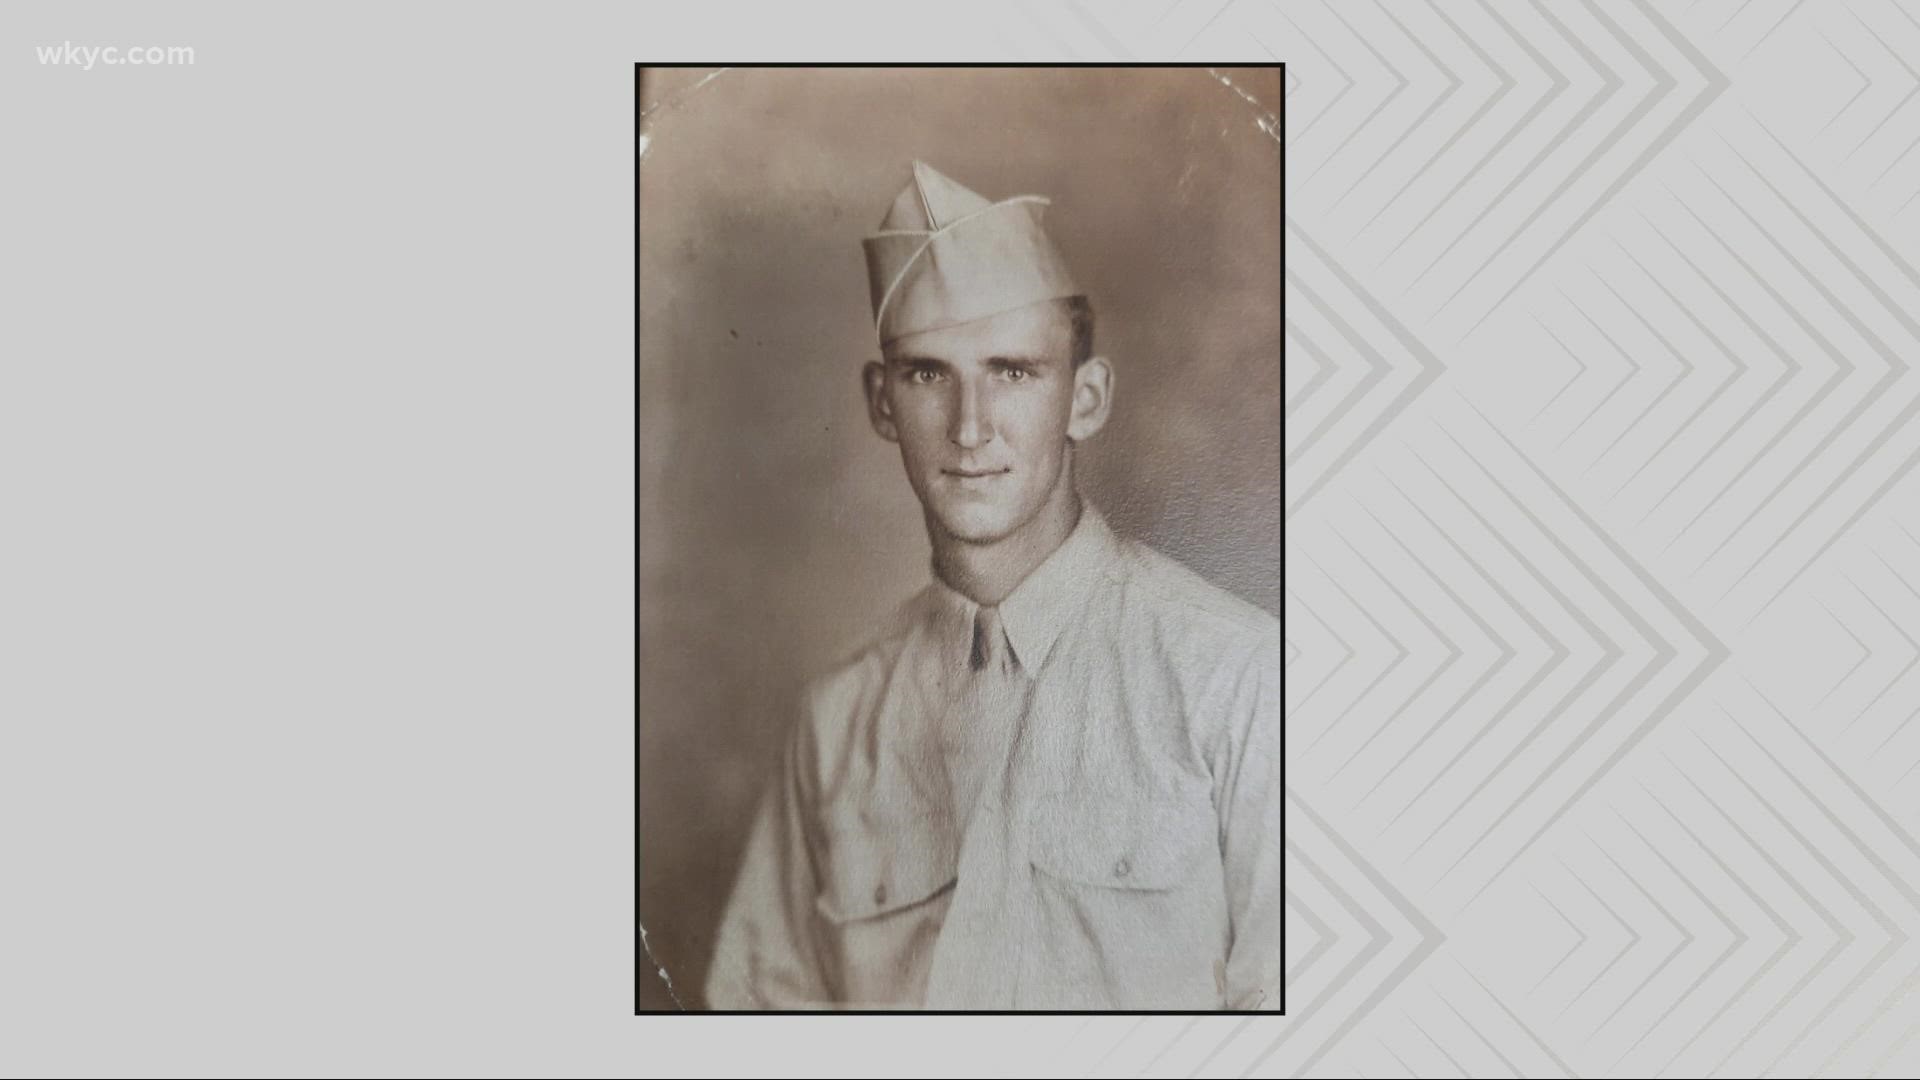 Army Pvt. Emmet W. Schwartz was reported killed in action in 1944. His remains were identified in July of 2021.